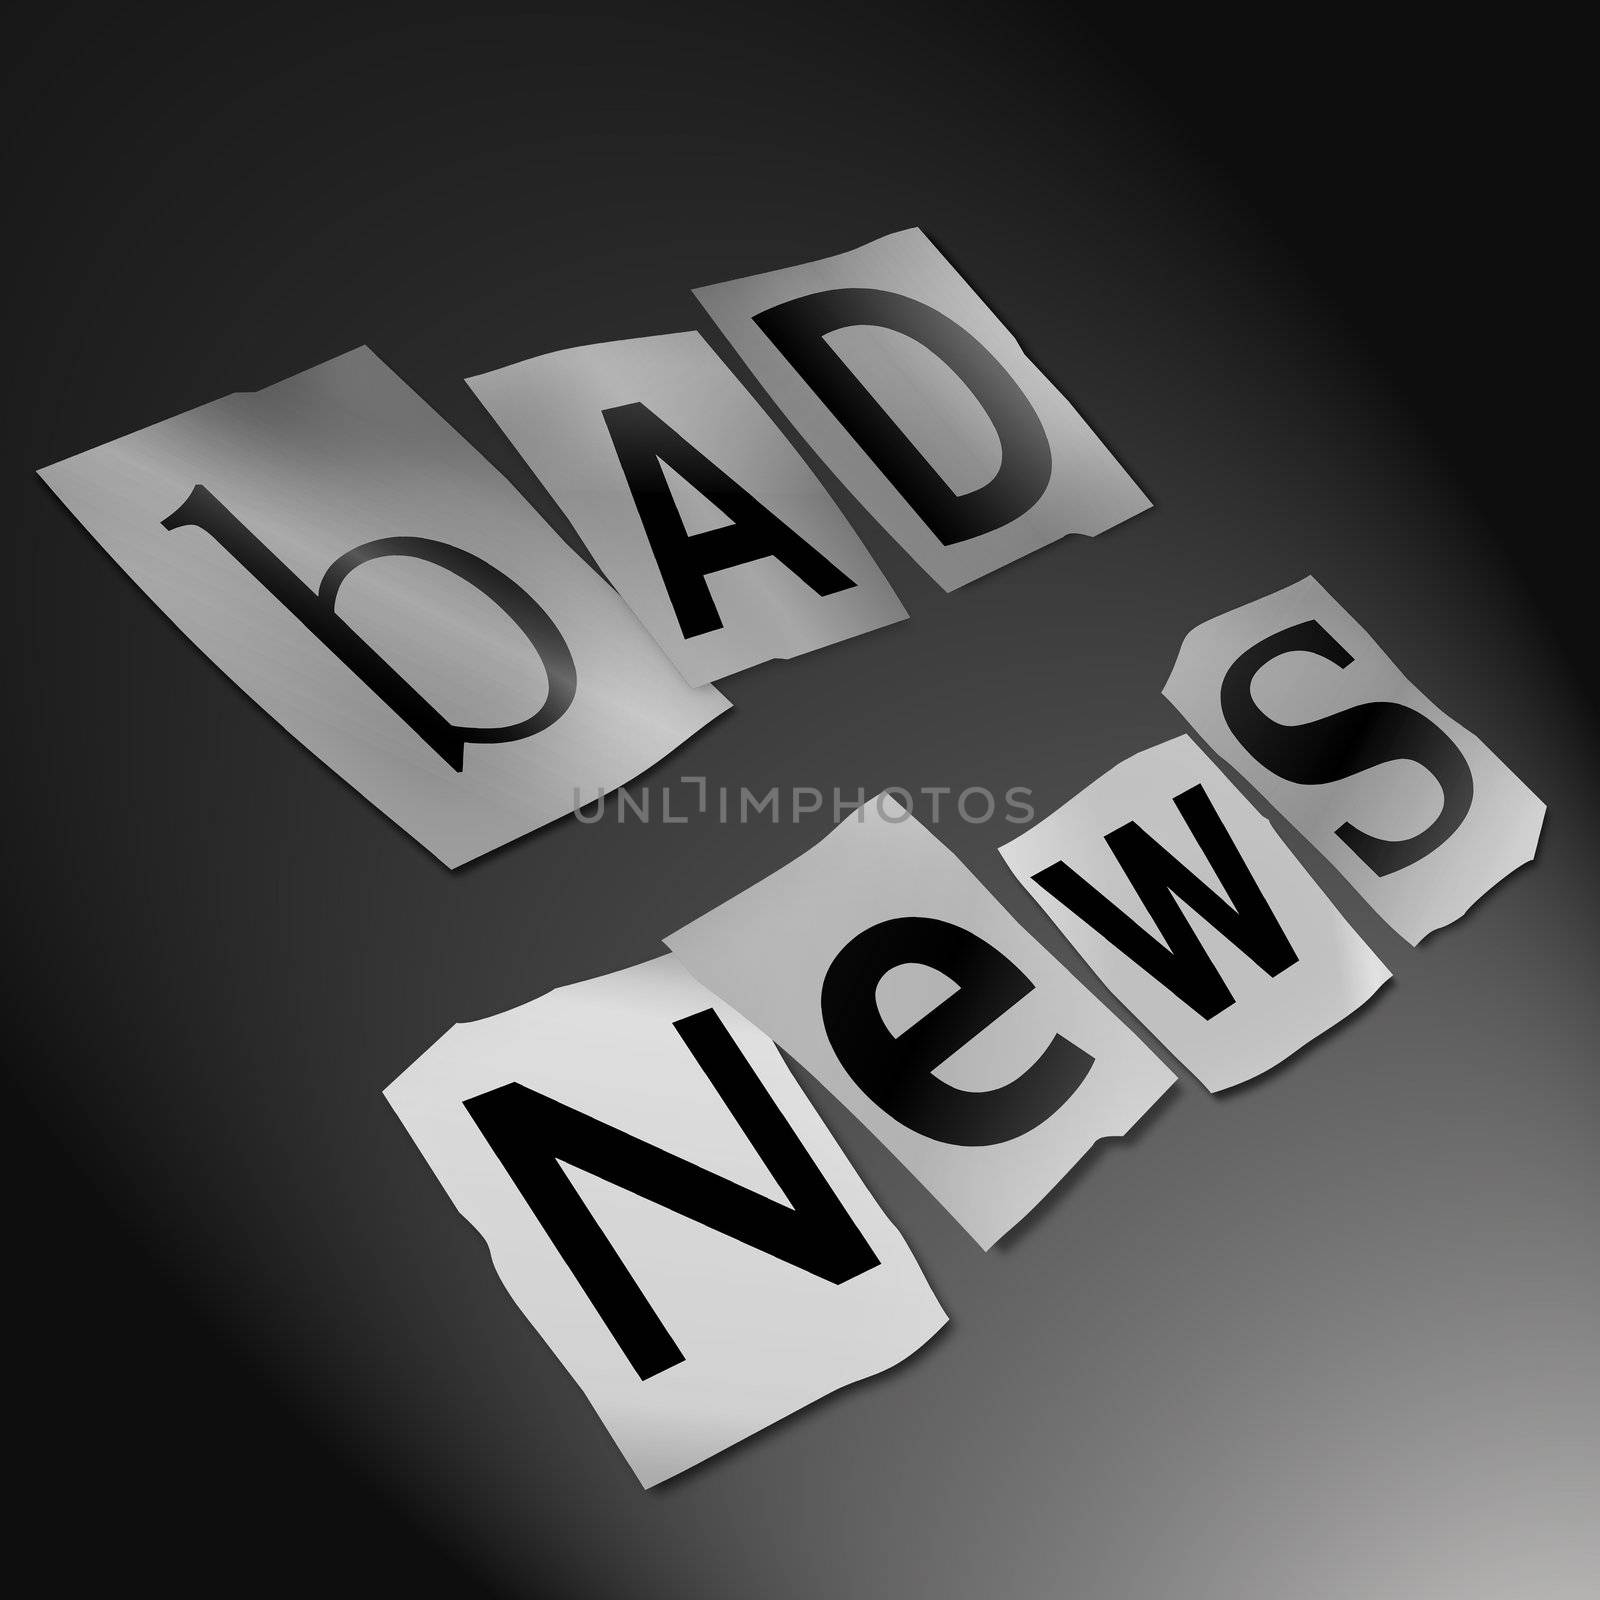 Illustration depicting cutout printed letters arranged to form the words bad news.